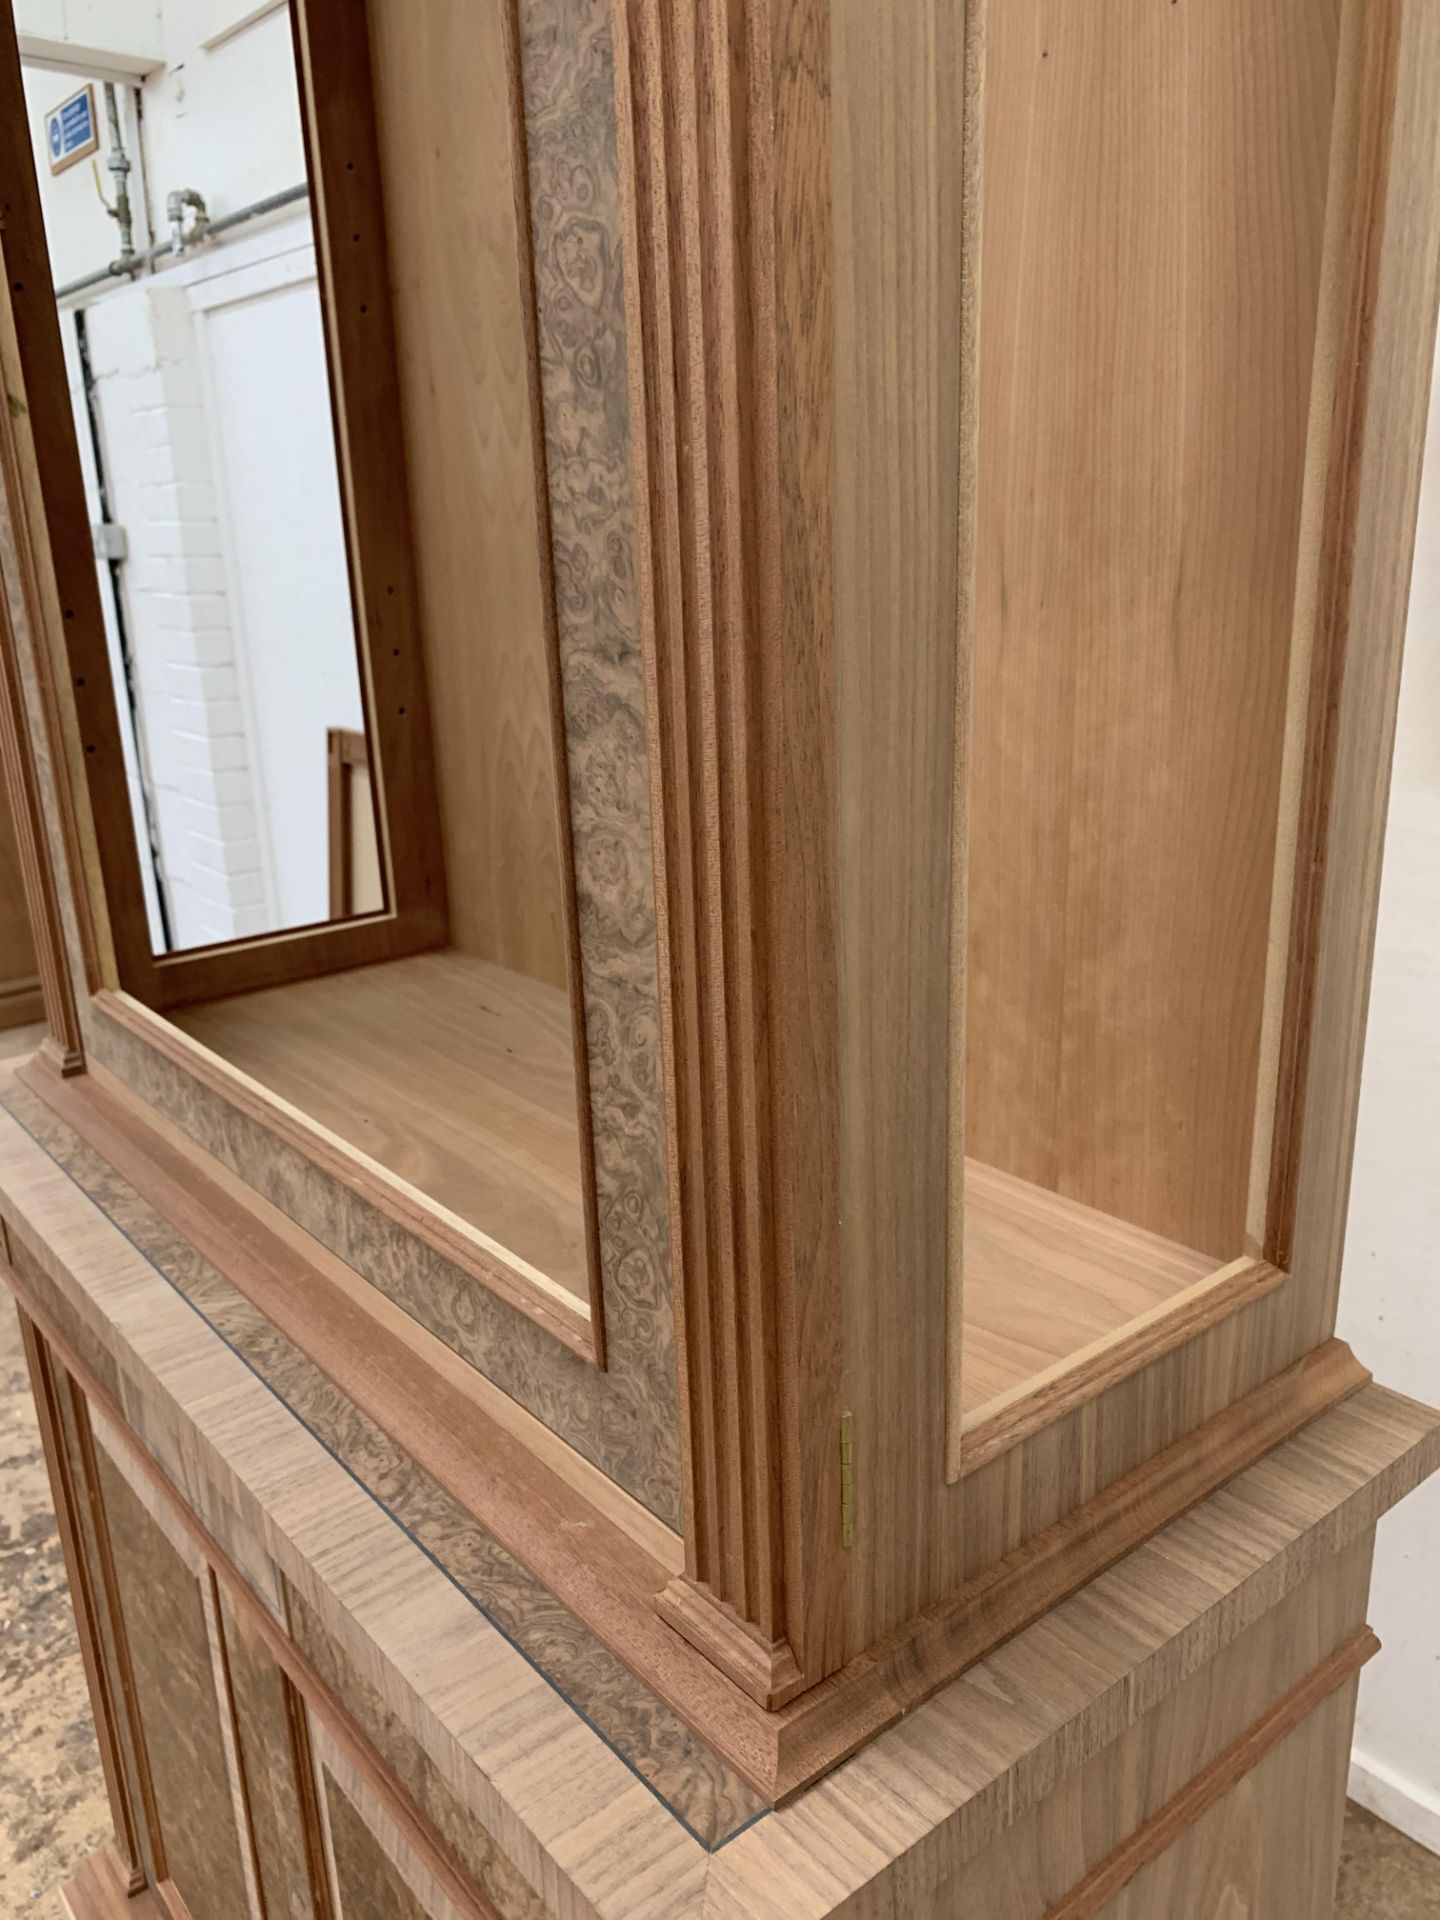 Two-door tall Bookcase, in walnut finish, from the Corinthian range, requires finishing/polishing. - Image 4 of 5